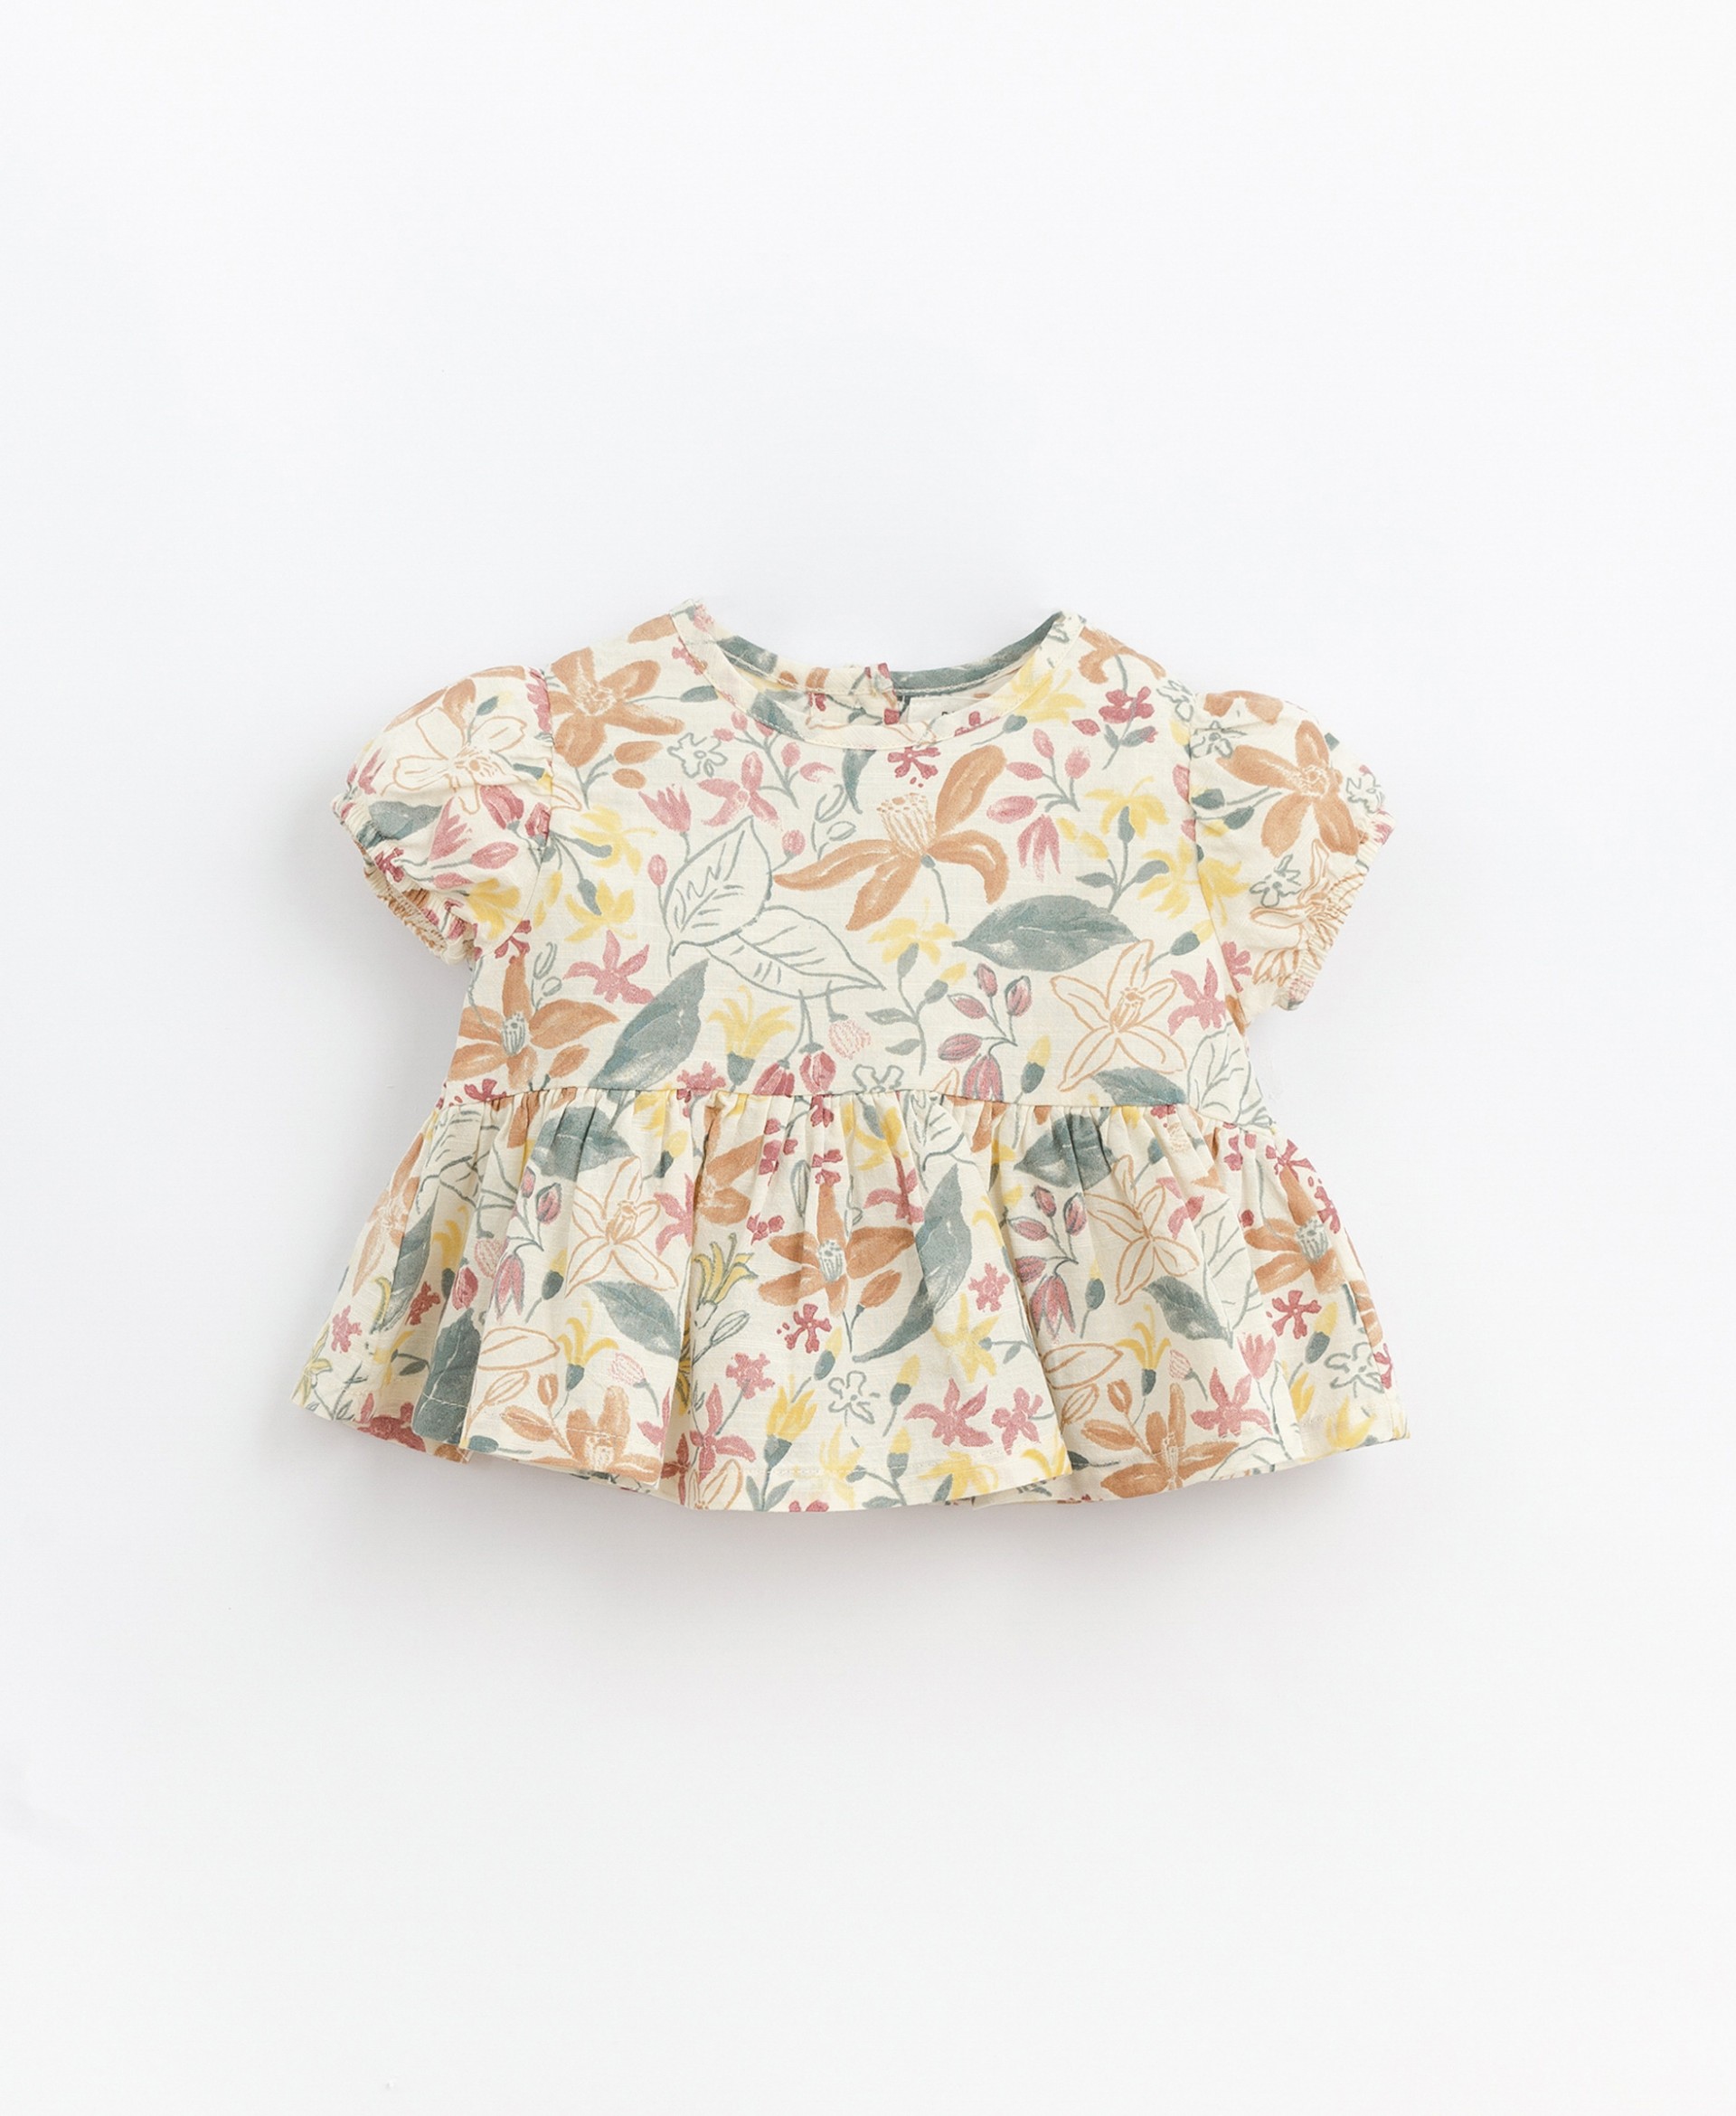 Tunic in floral print fabric | Basketry